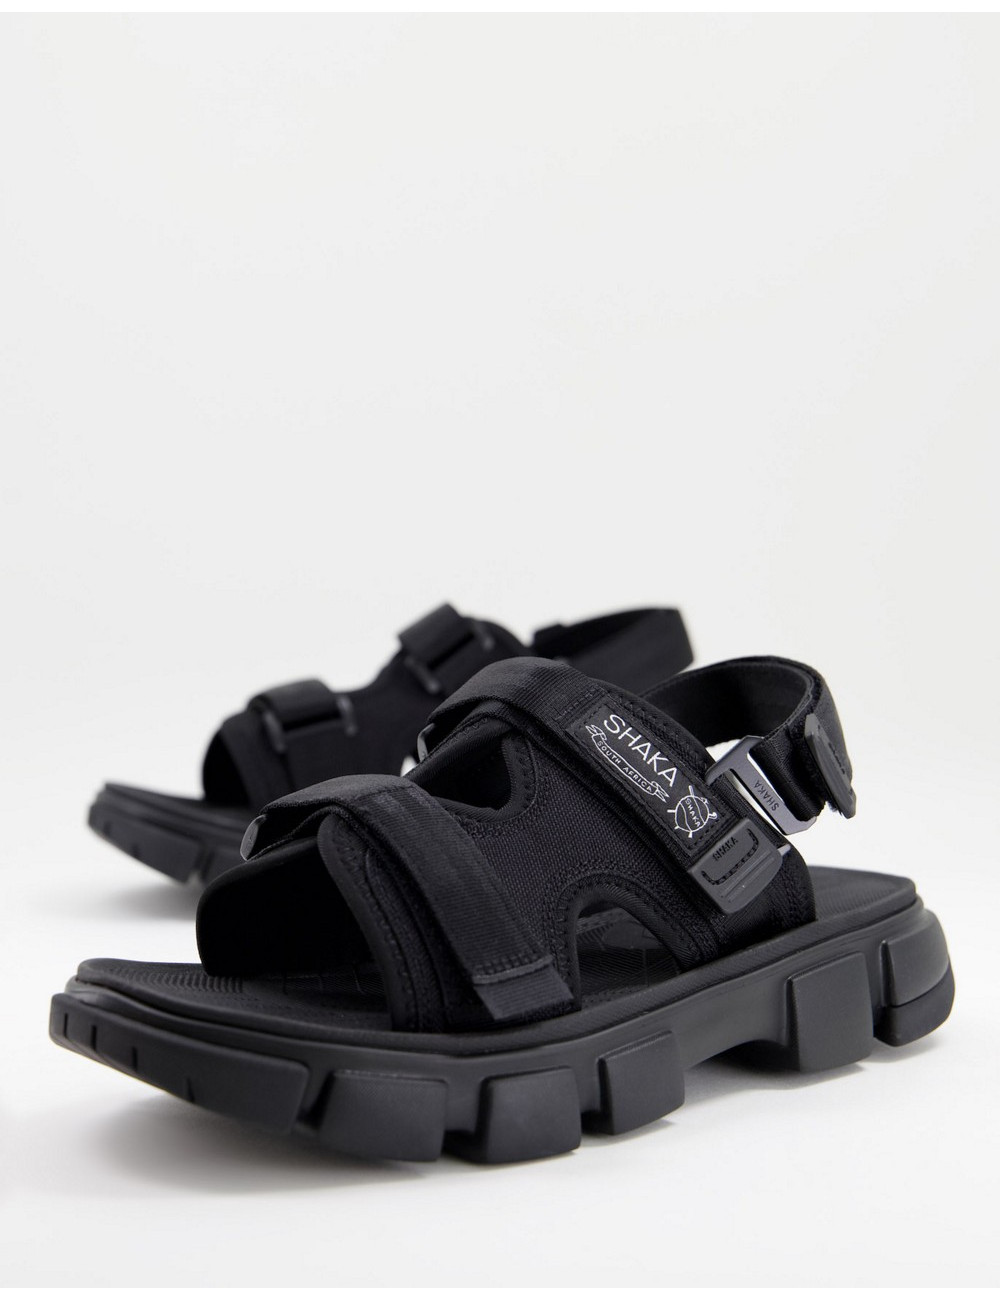 Shaka chill out sf sandals...